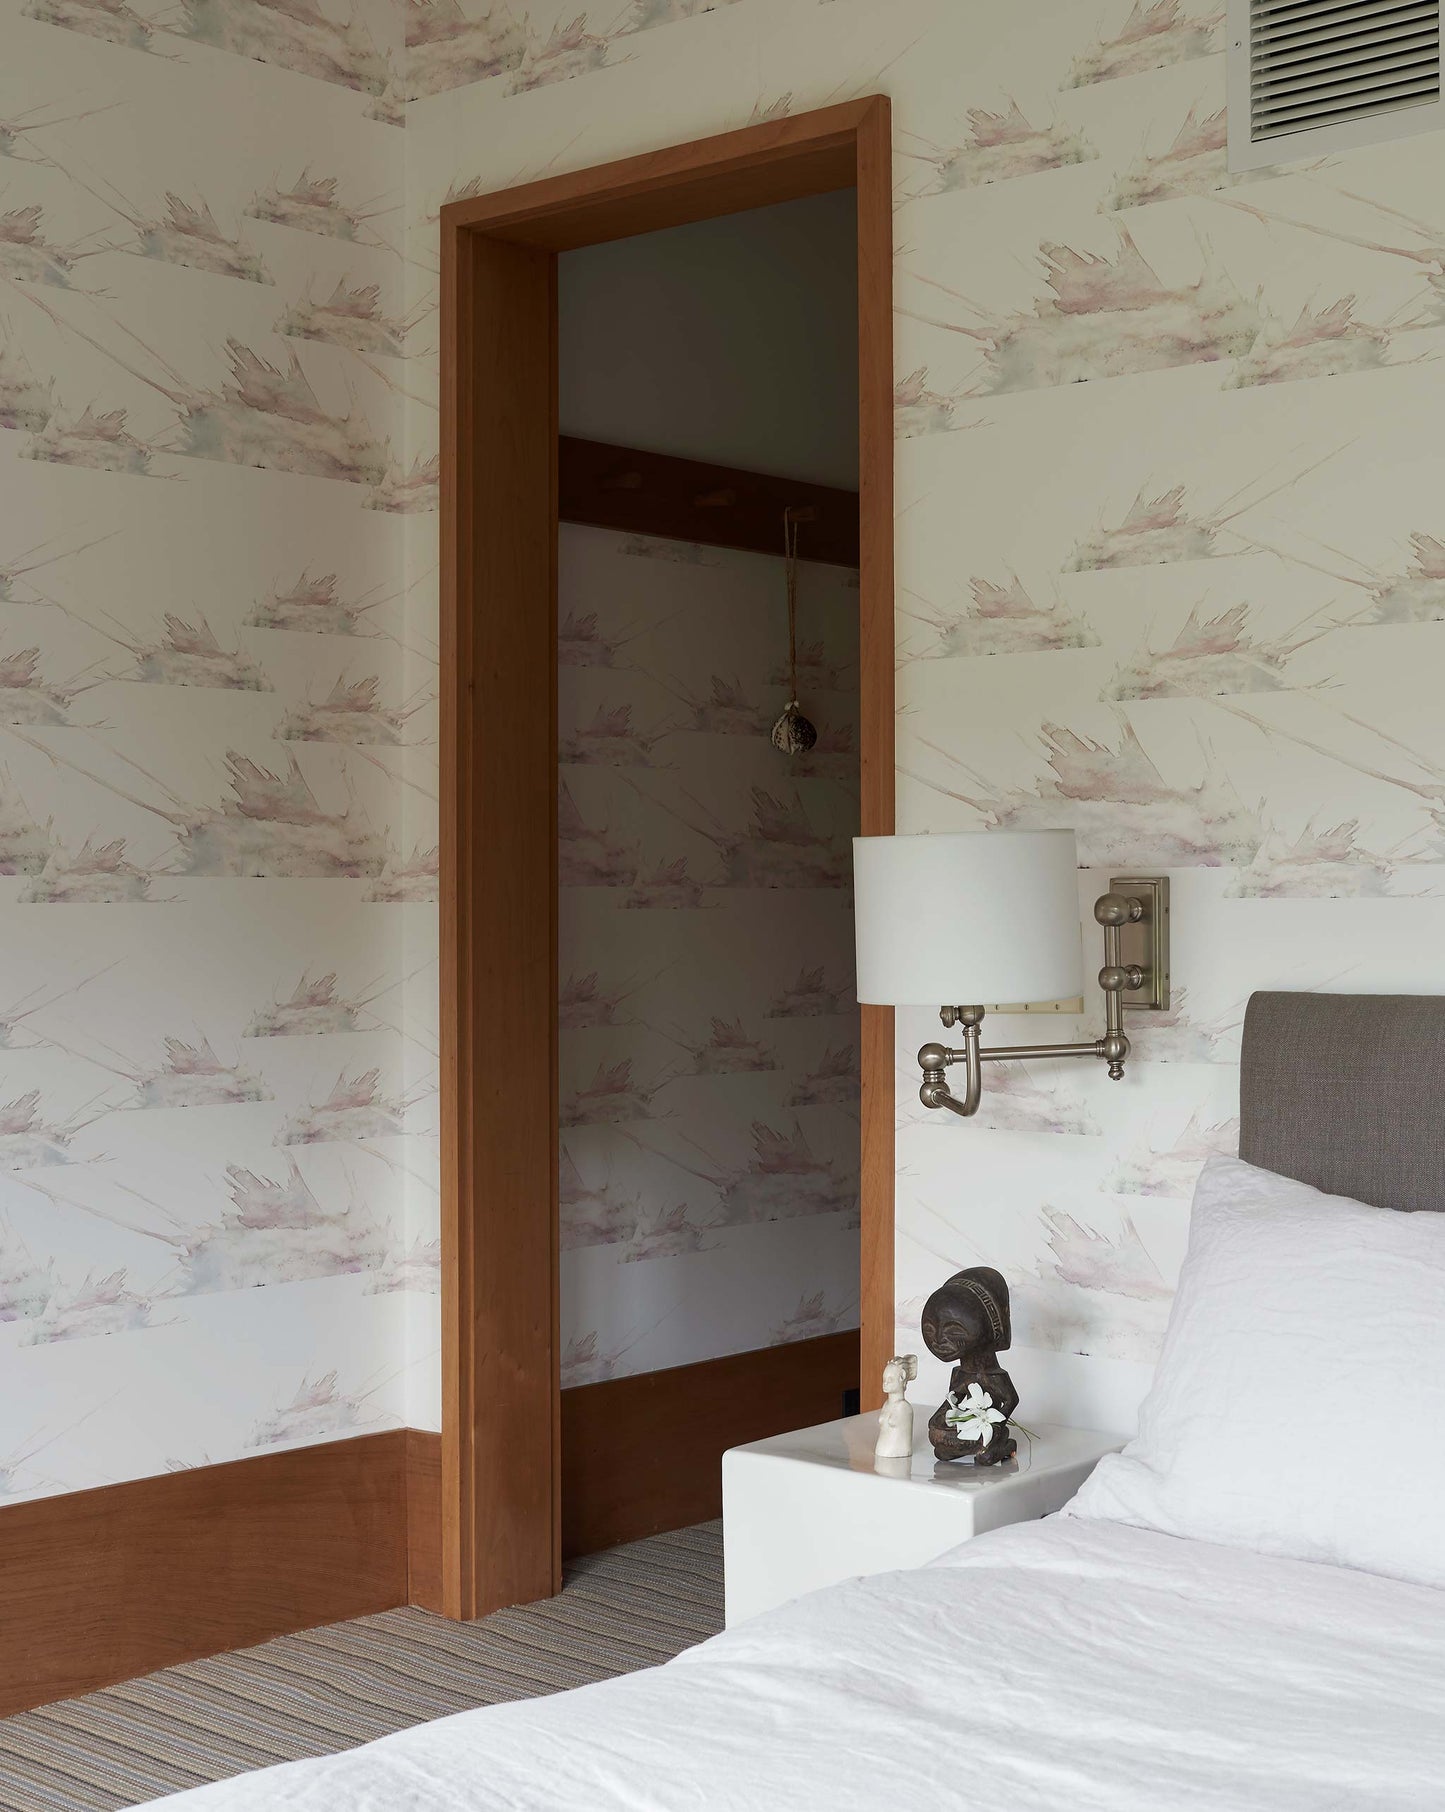 Eskayel's Love in the Middle Wallpaper in the colorway Ice installed in a bedroom.